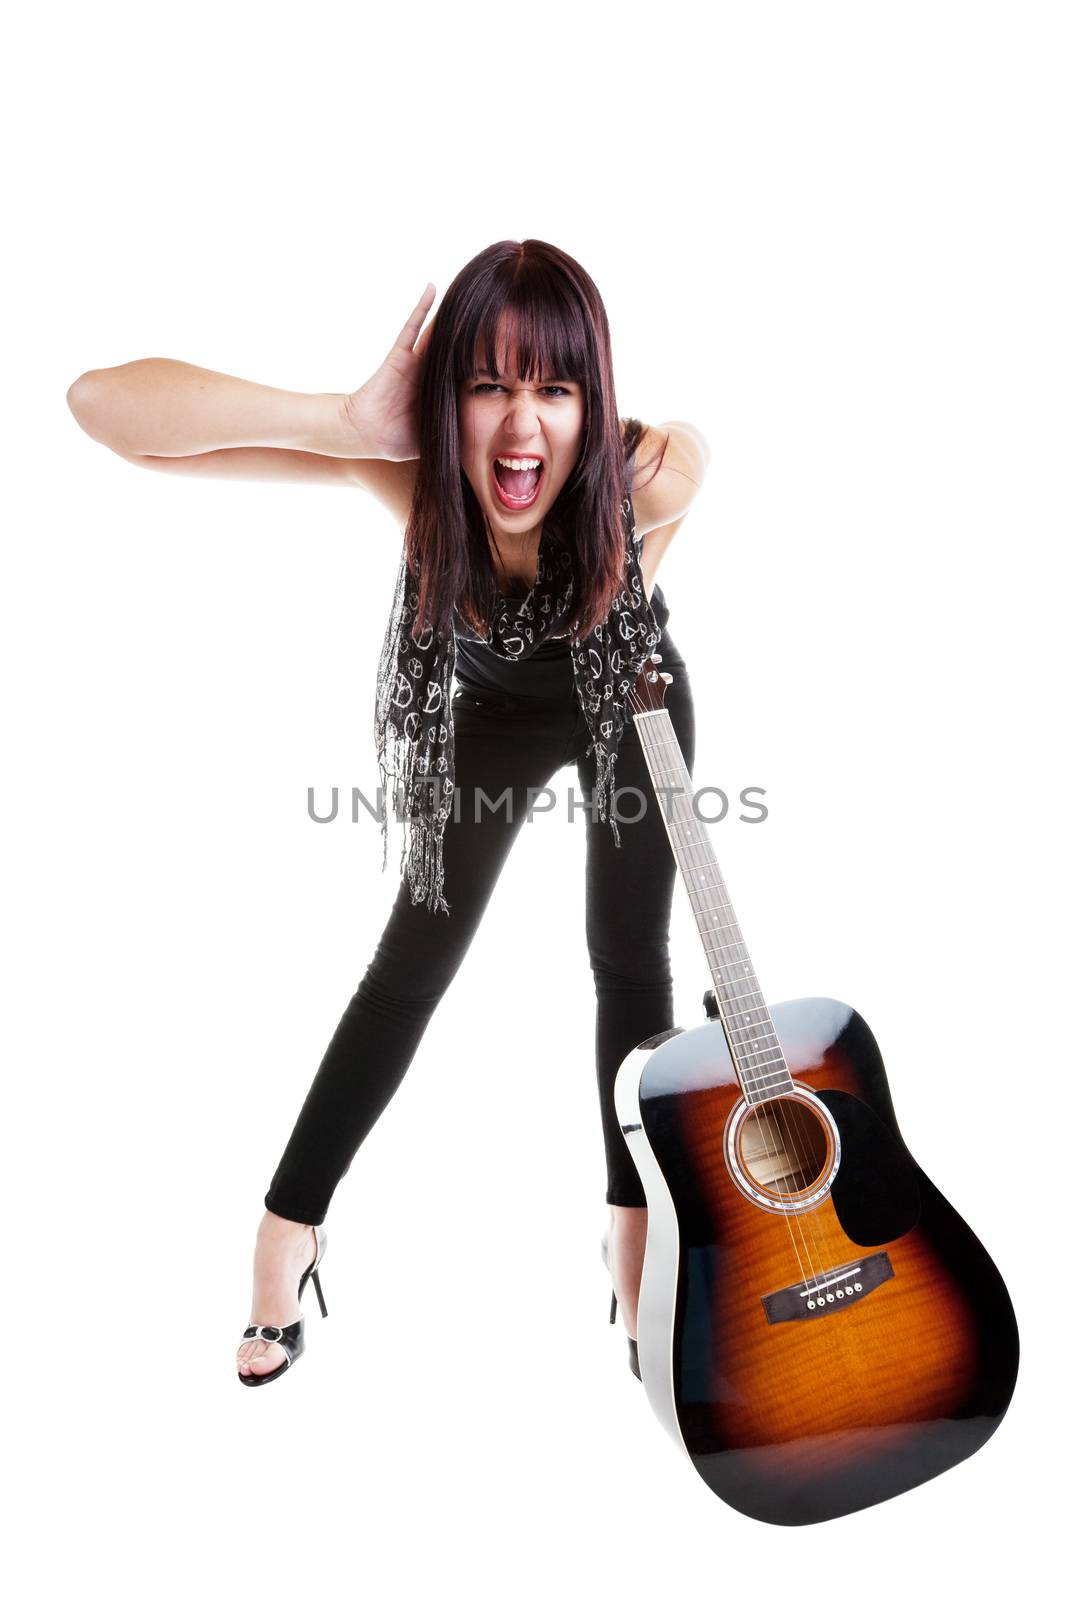 Screaming musician with guitar, dressed in Indie style fashion.